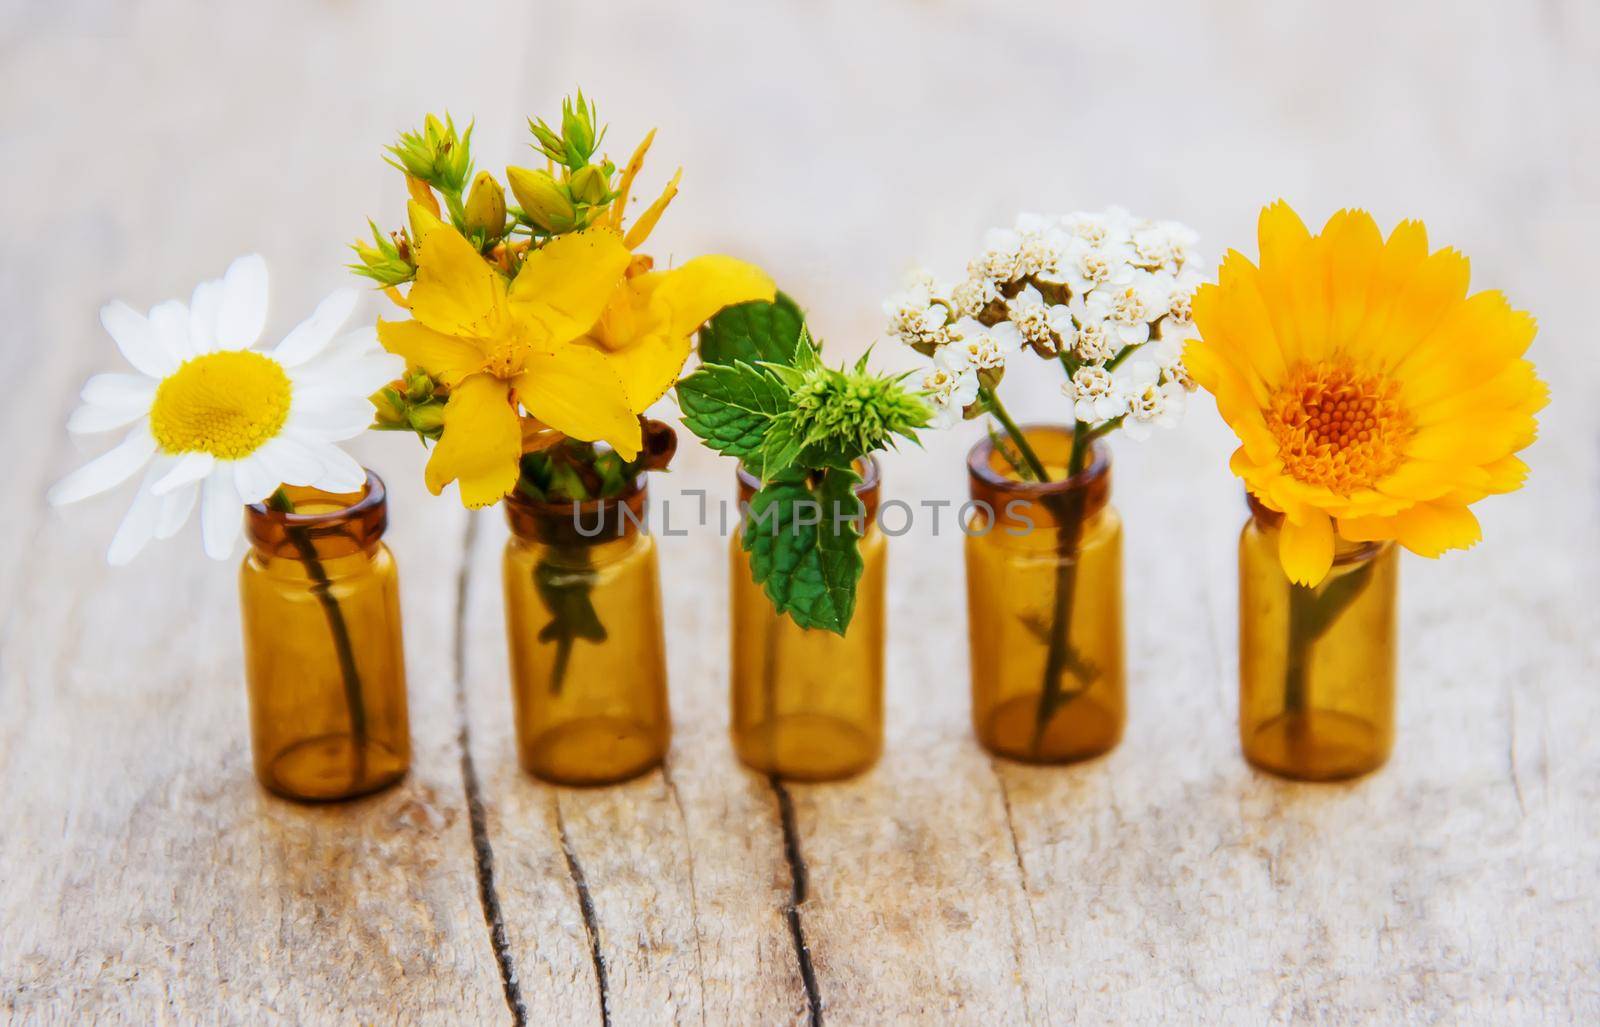 extracts of herbs in small bottles. Selective focus. by yanadjana